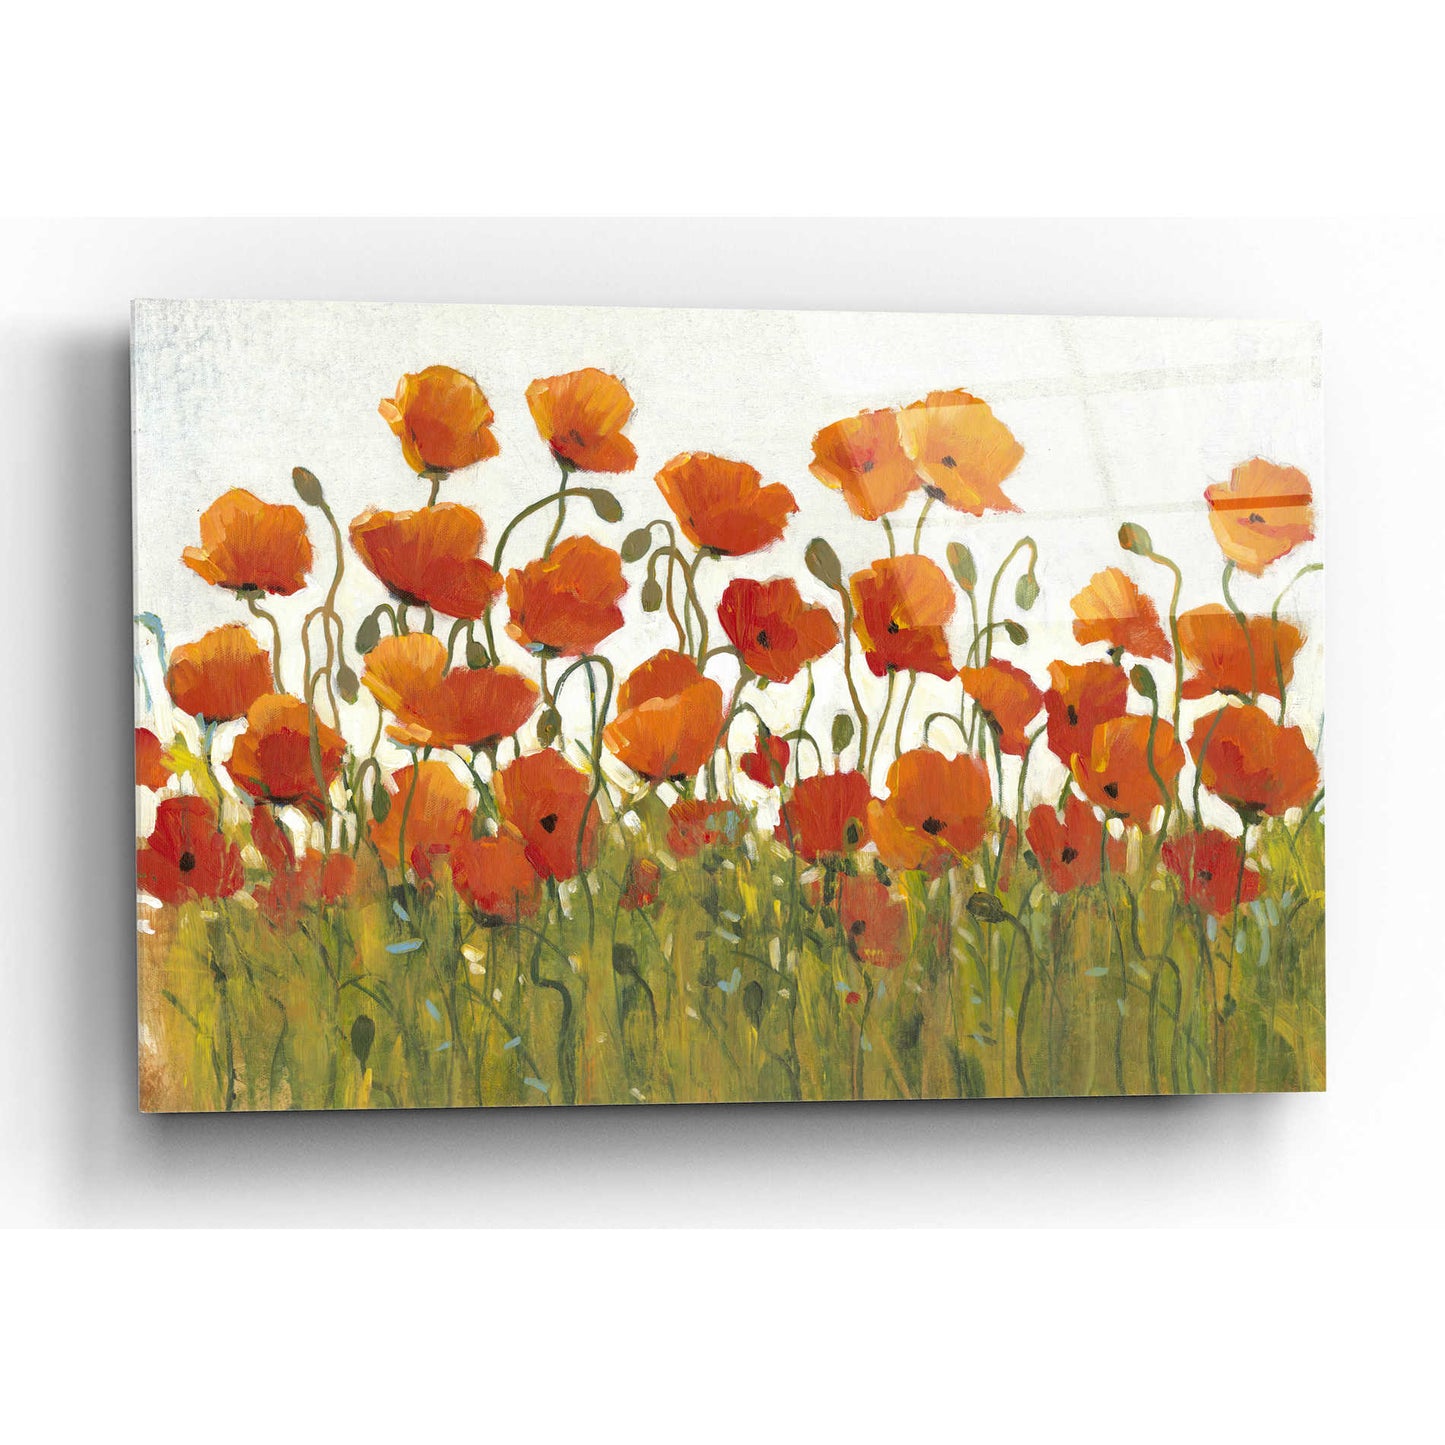 Epic Art 'Rows of Poppies I' by Tim O'Toole, Acrylic Glass Wall Art